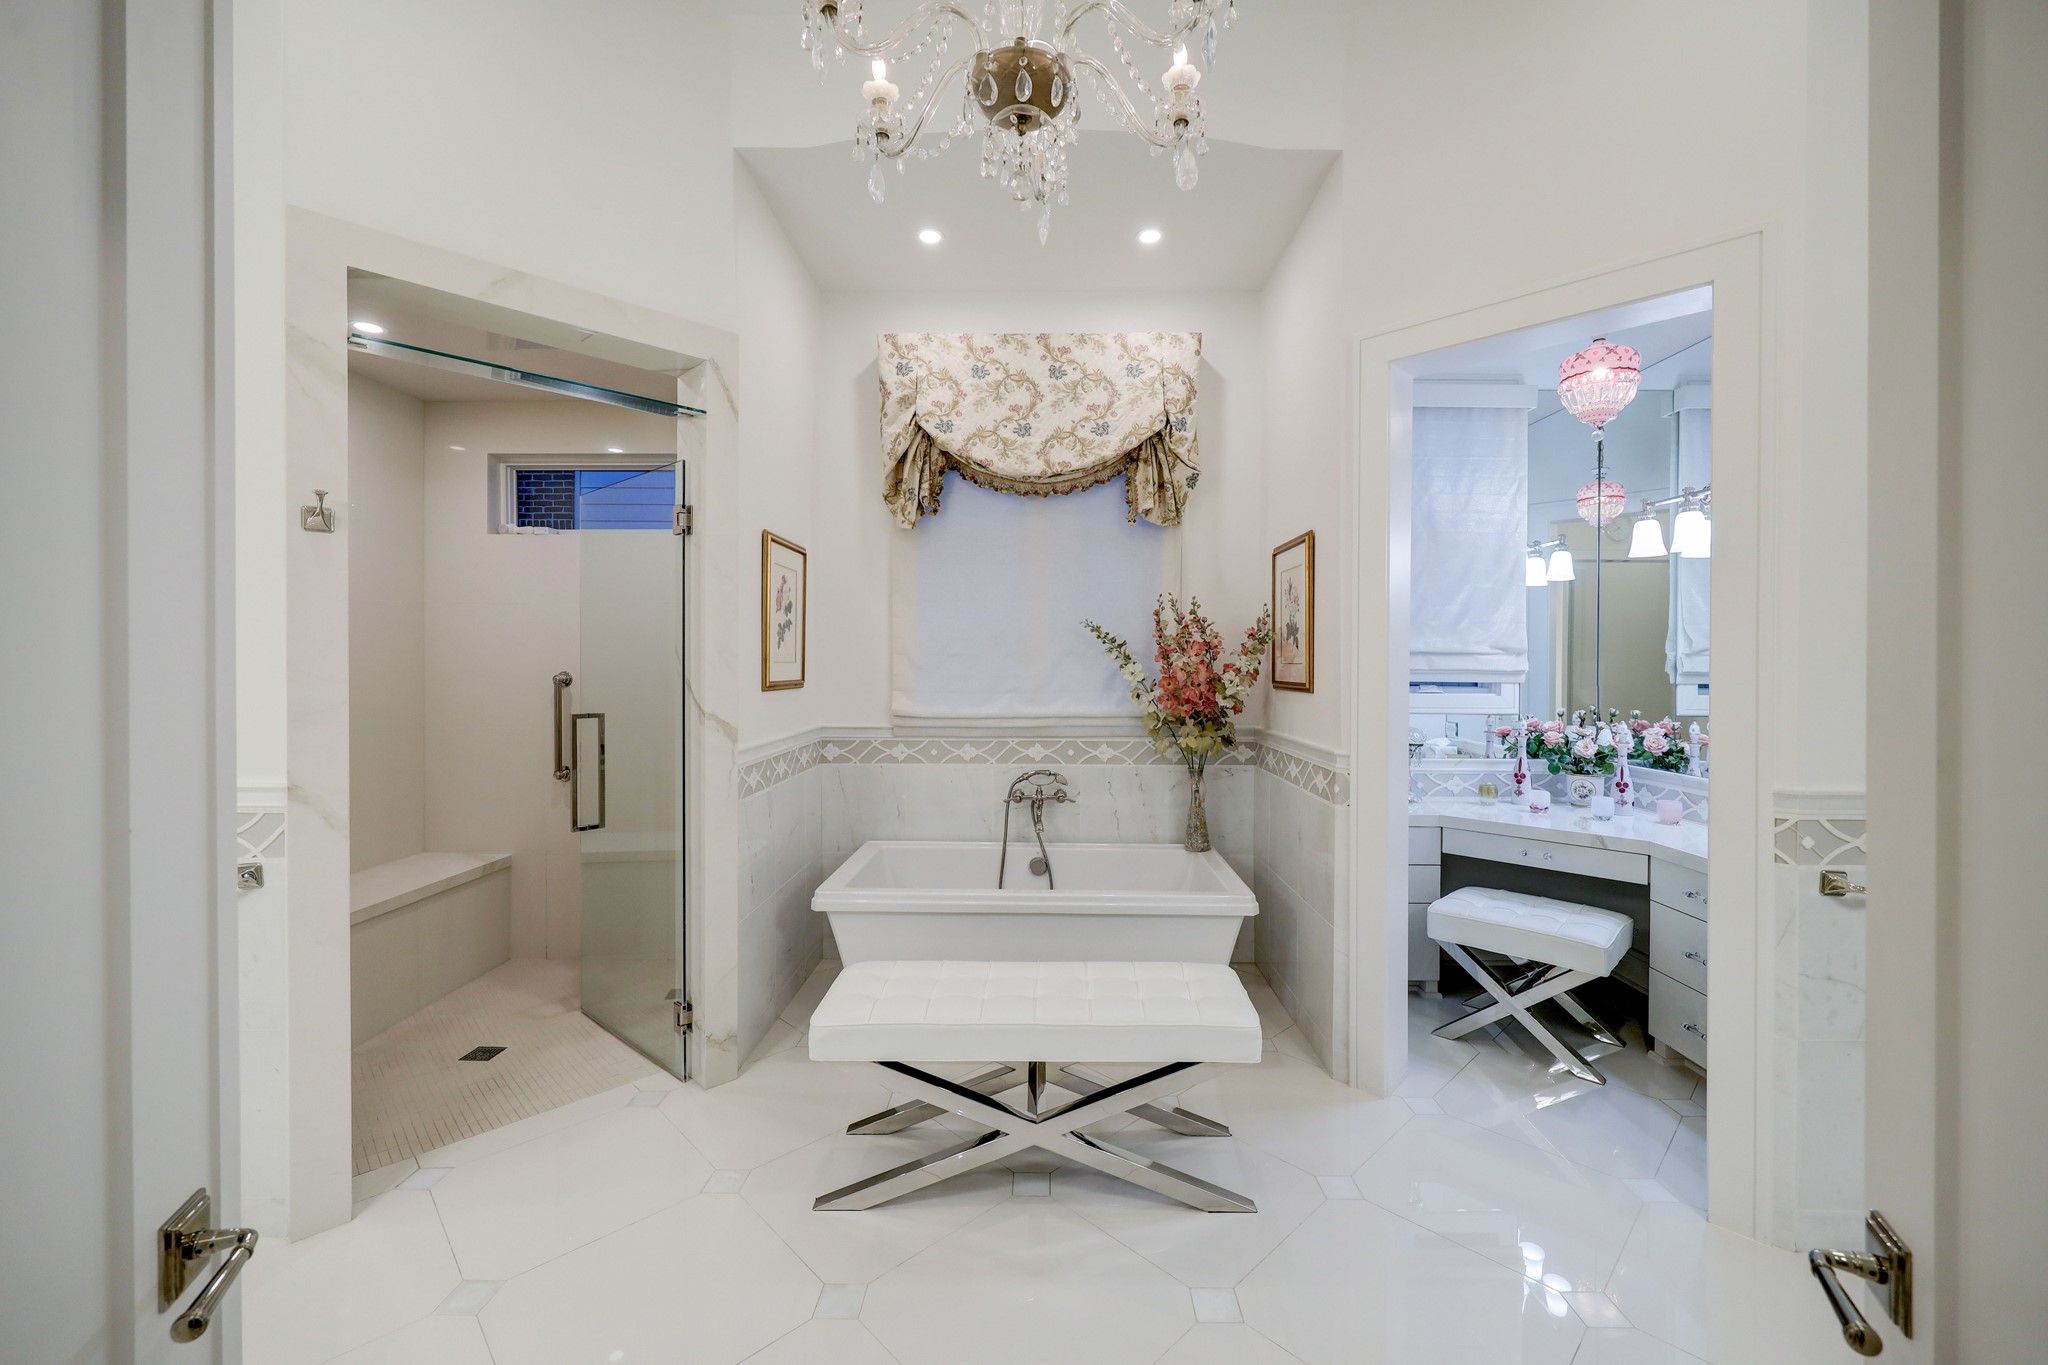 [Primary Bath]
The primary bath features dual sides with two water closets, one fitted with a bidet; porcelain-deck sink cabinets; marble and glass backsplashes; marble tile floors; zero-entry steam shower; soaking tub; and a separate vanity room with vanity cabinet, mirrored wall, and specialty lighting.